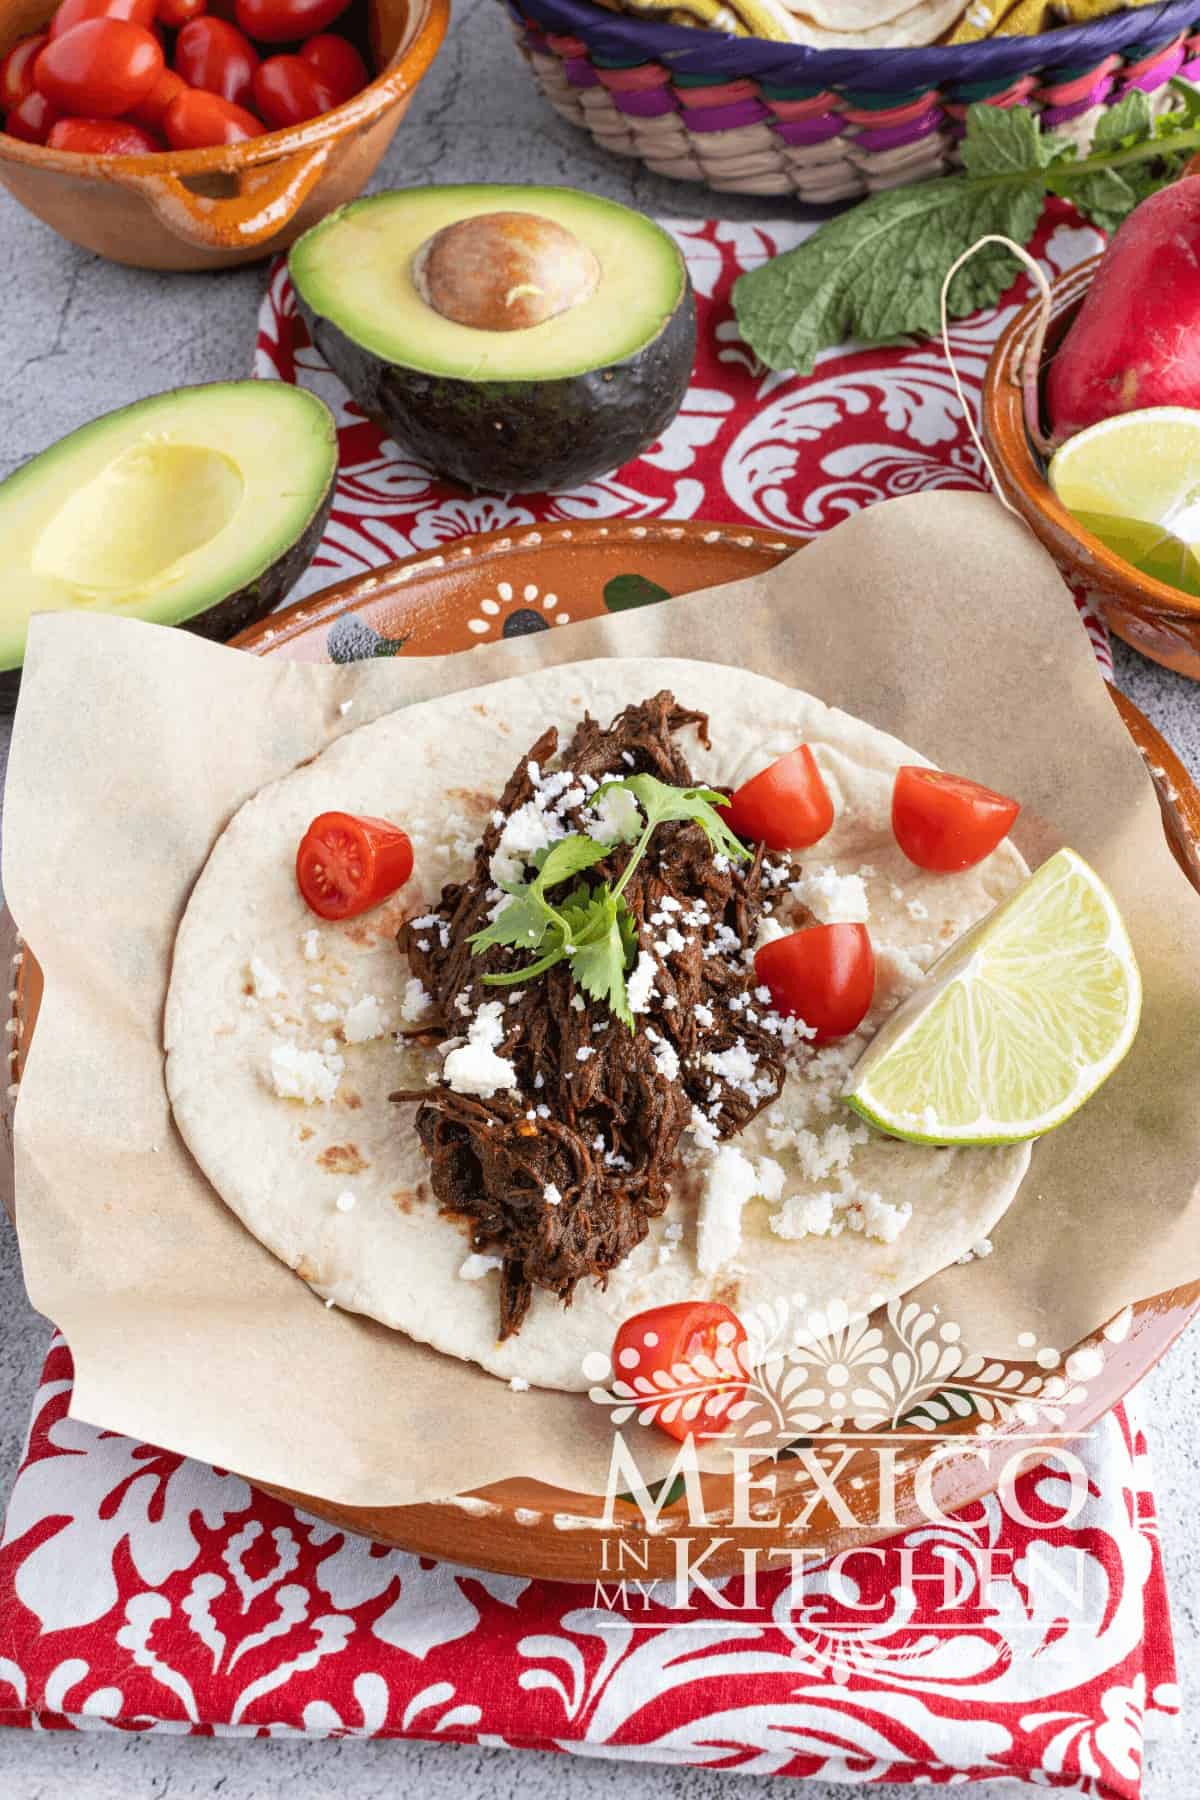 Shredded beef with ancho chiles tacos, garnished with tomatoes, queso fresco and cilantro.